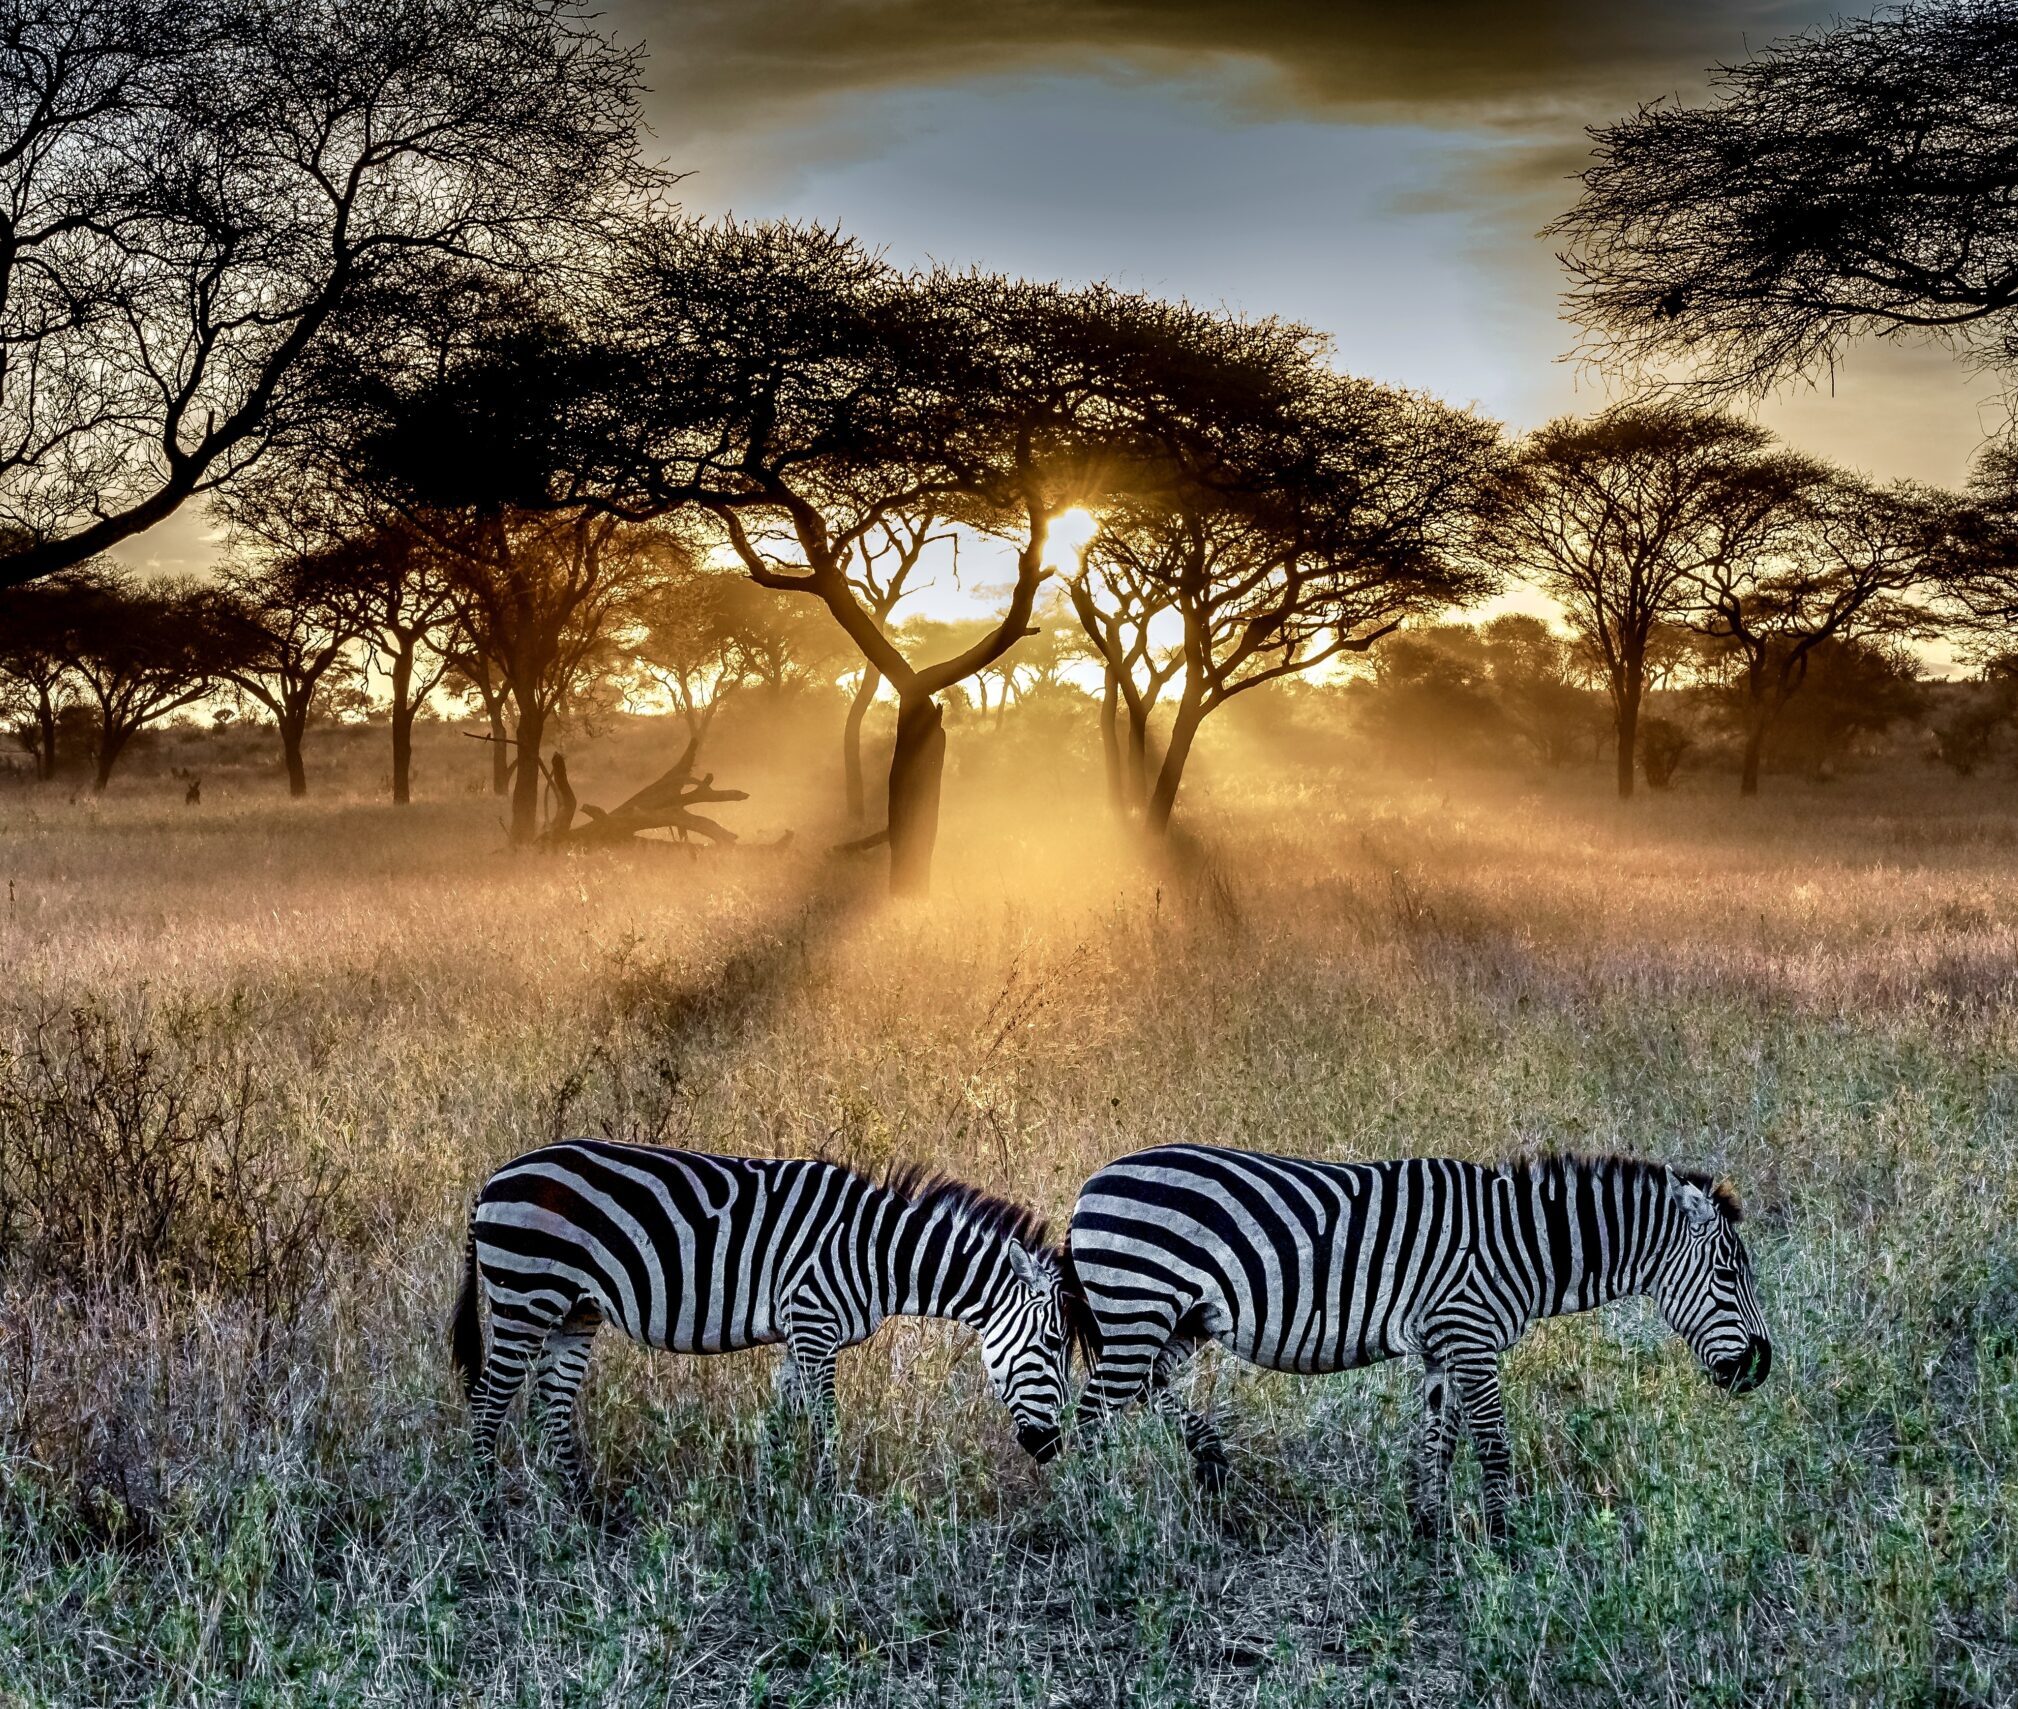 A field covered in the grass and trees surrounded by zebras under the sunlight during the sunset